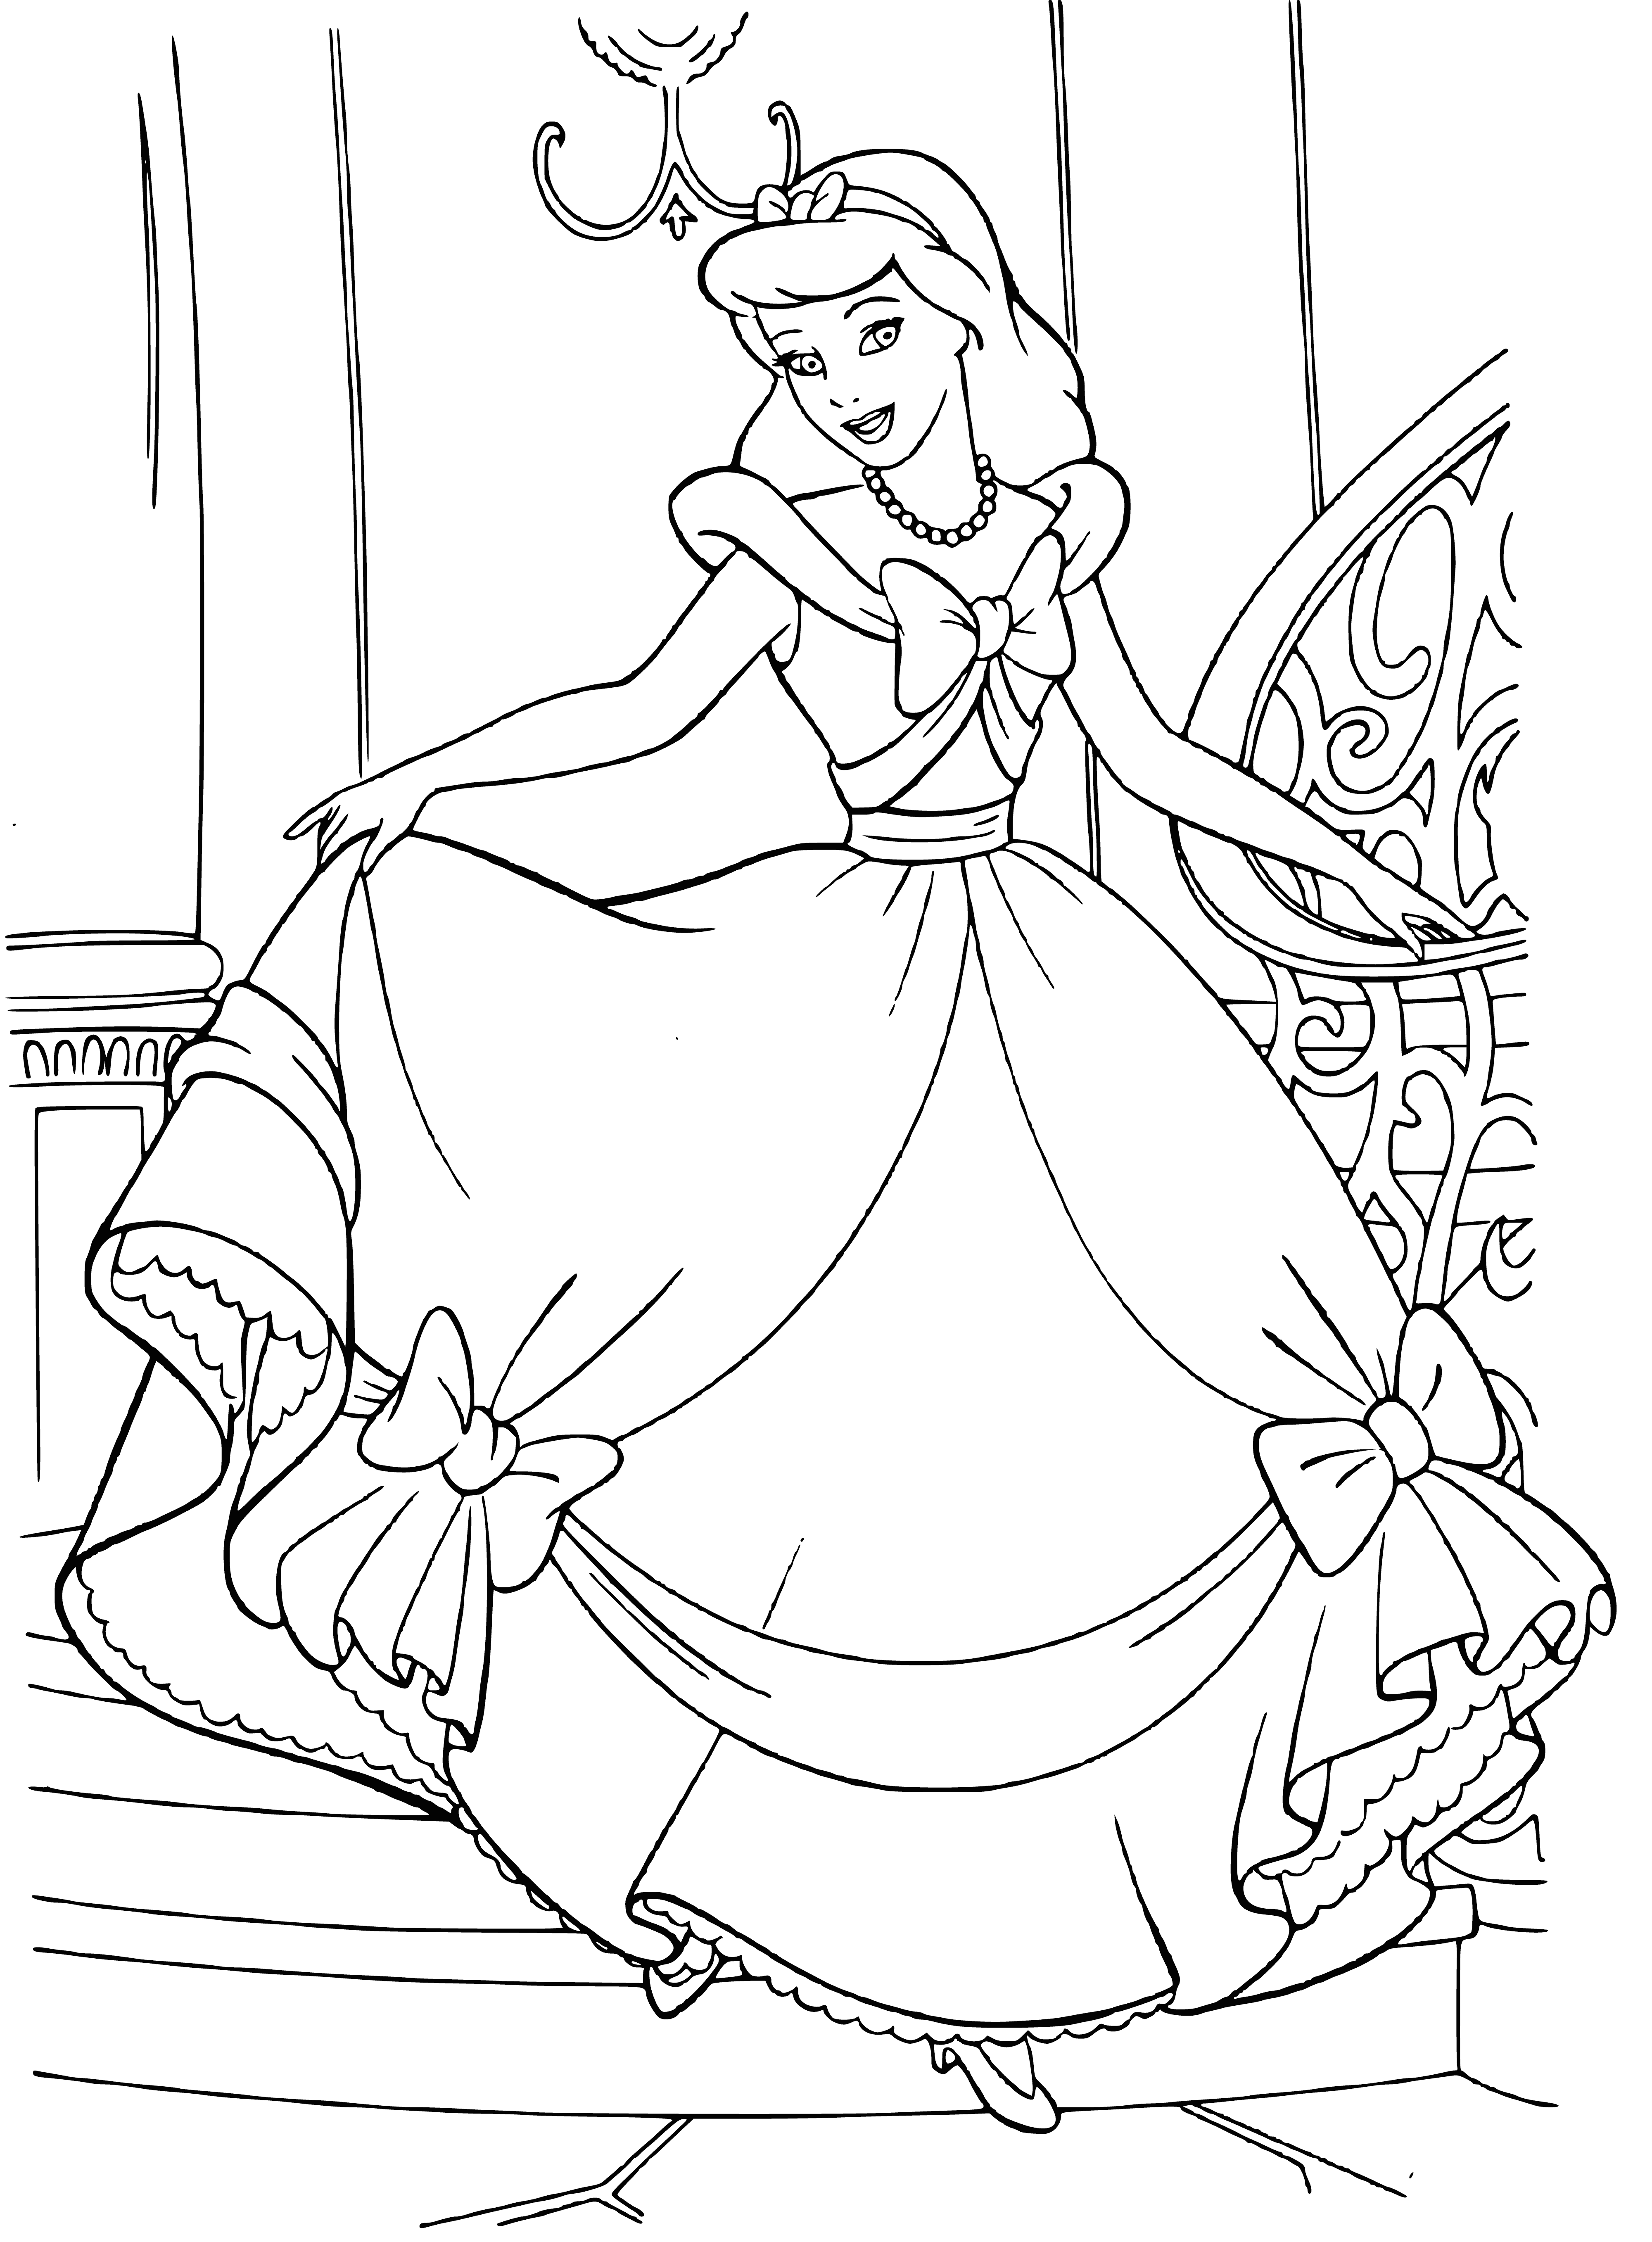 Lovely dress coloring page